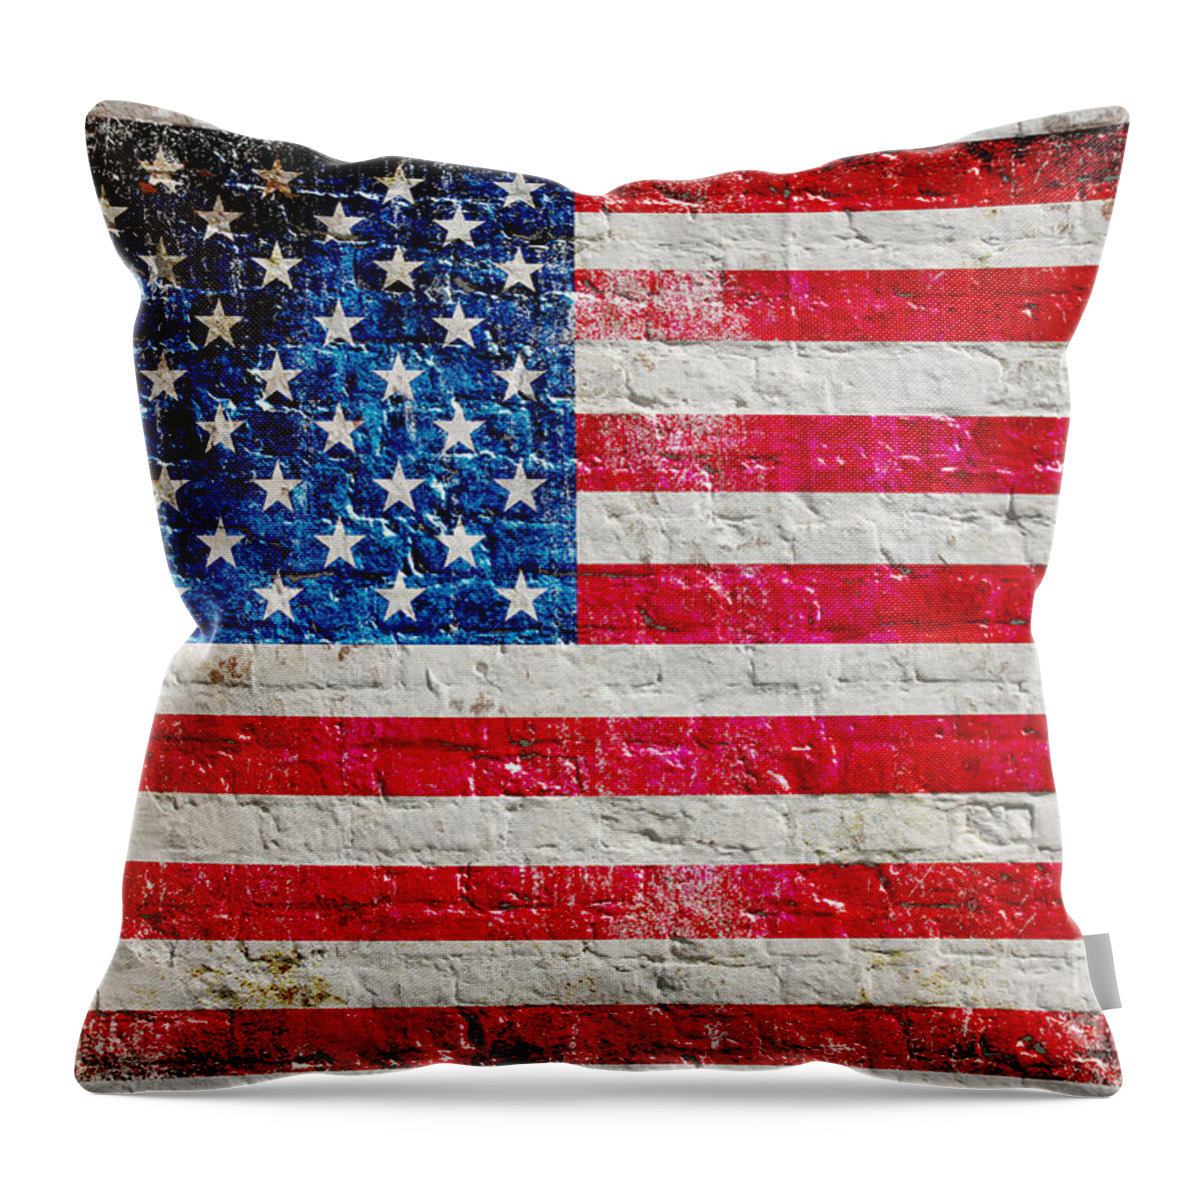 Wall Throw Pillow featuring the digital art Distressed American Flag On Old Brick Wall - Horizontal by M L C